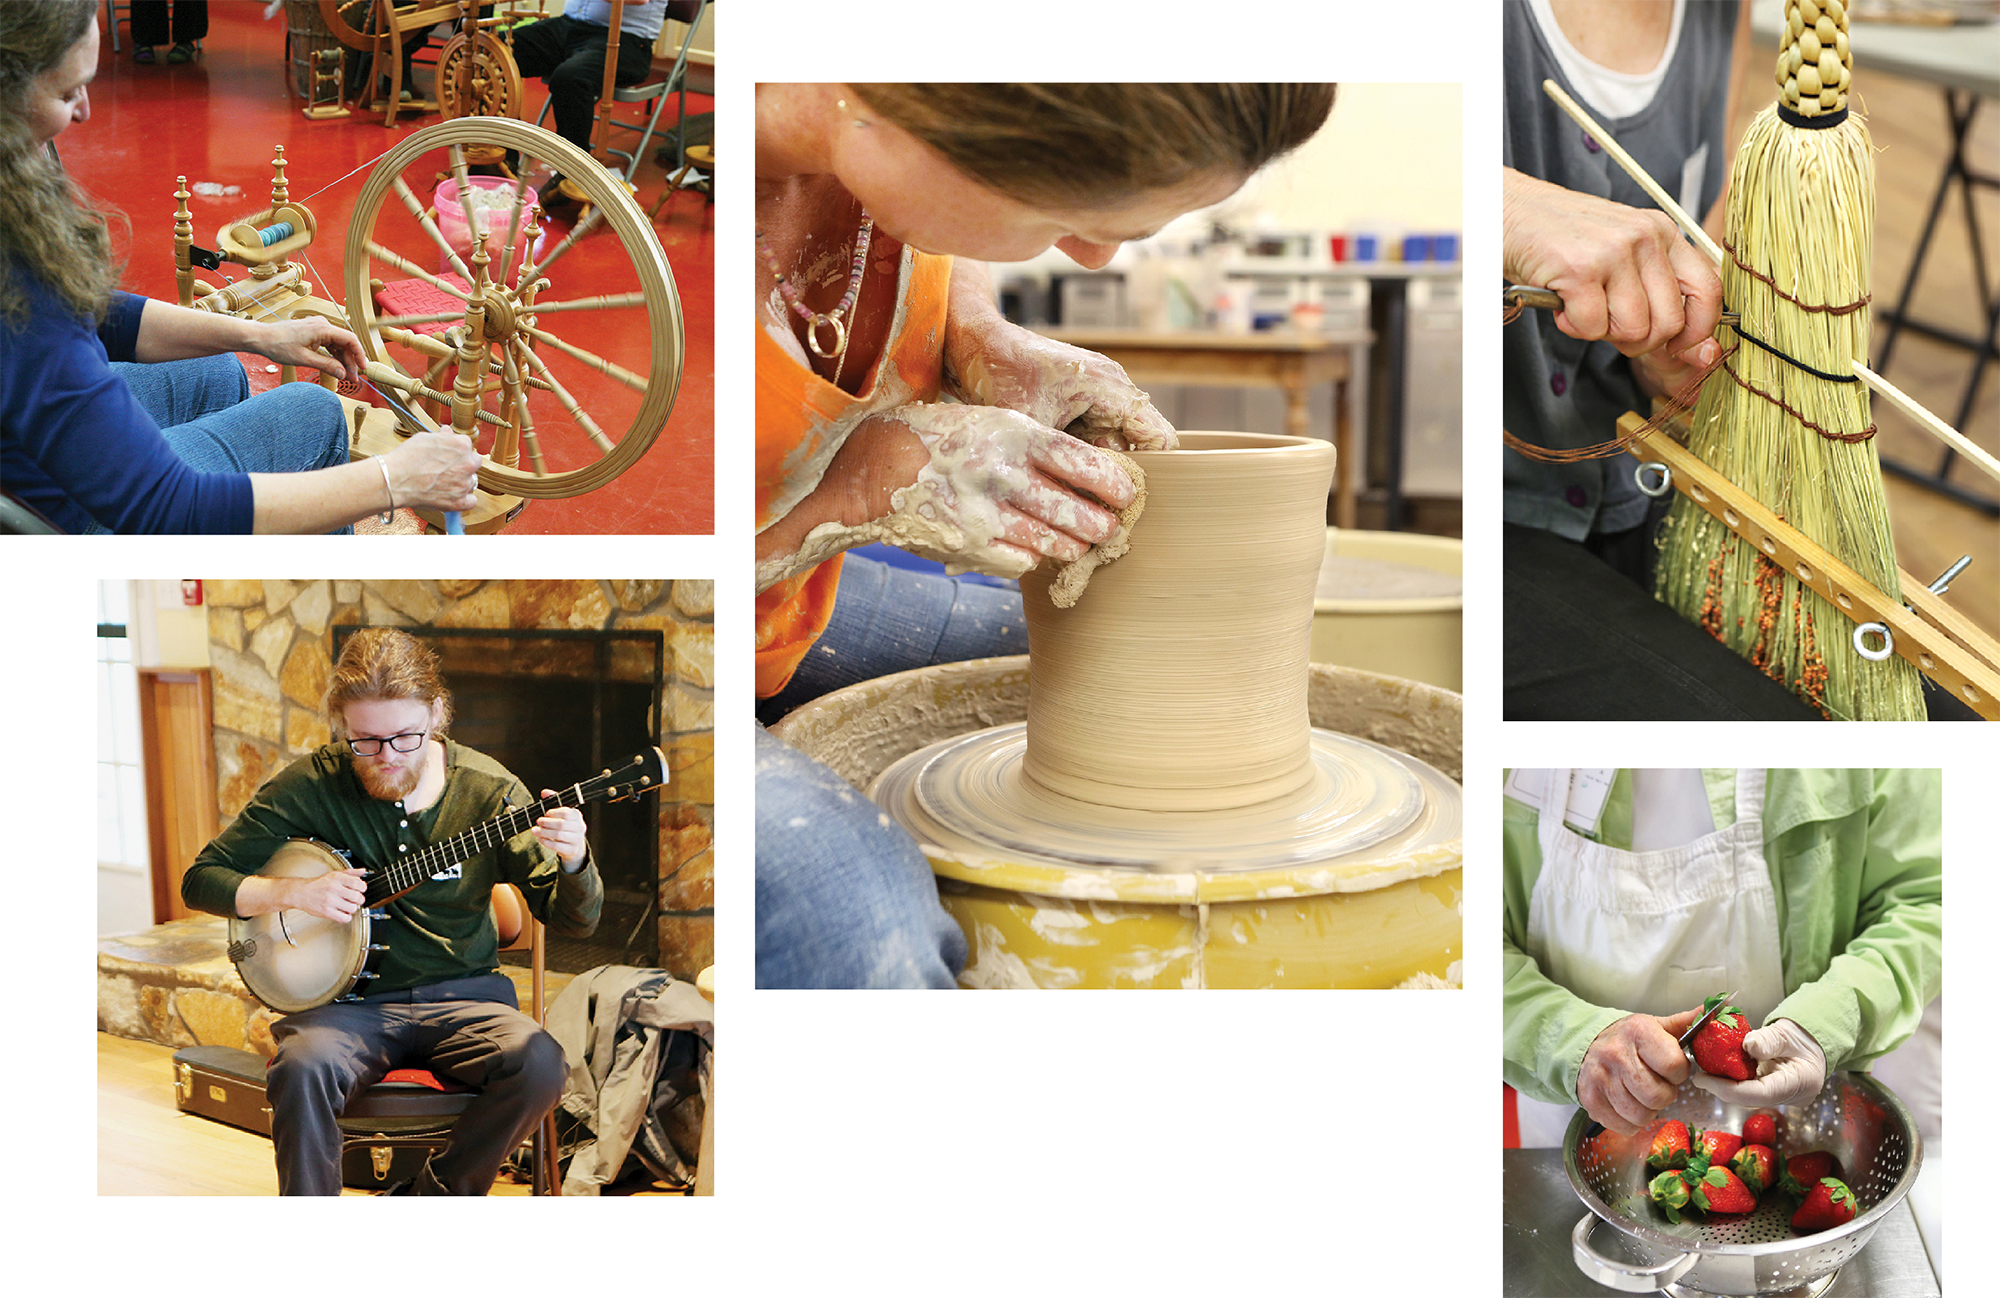 Spinning, clay, music, broommaking, and cooking collage of images